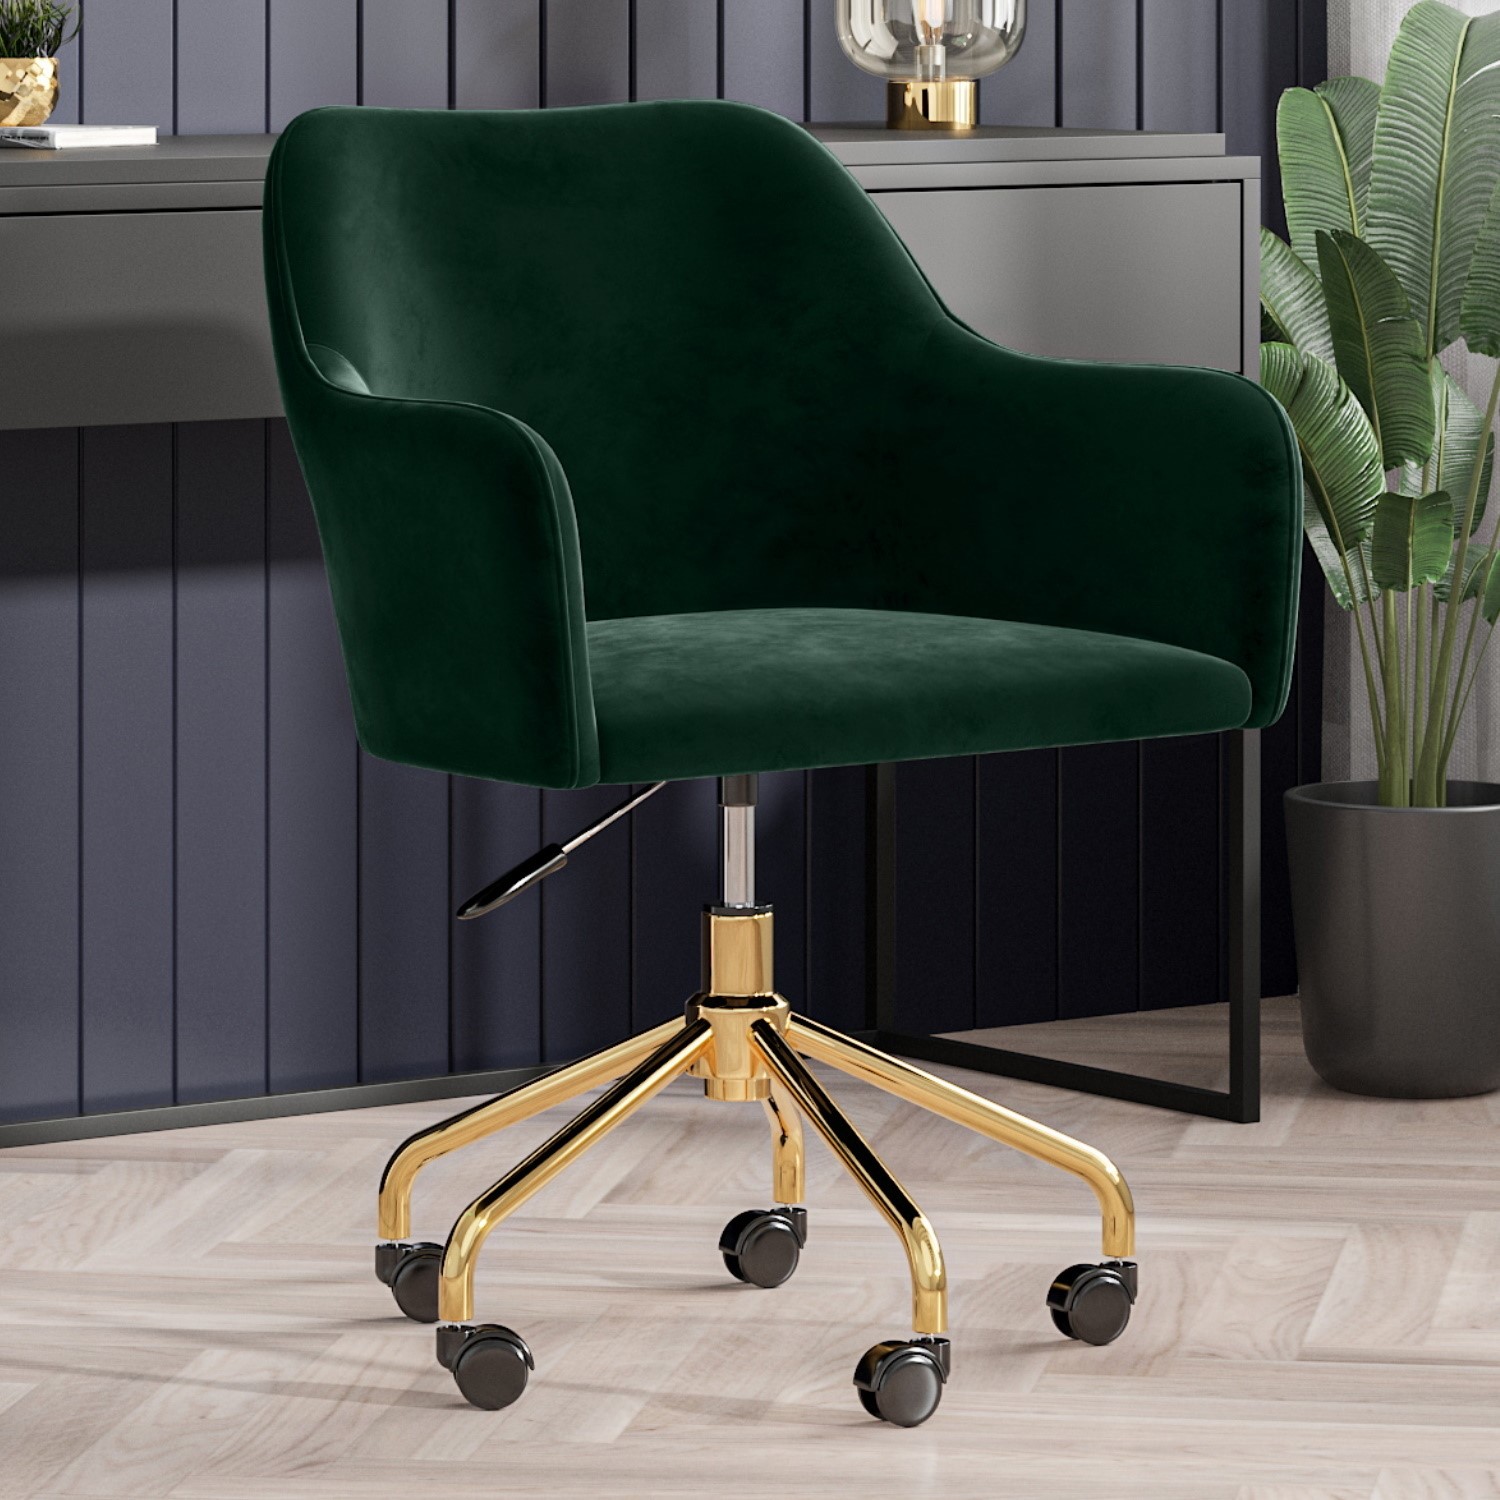 Read more about Green velvet office chair with arms marley